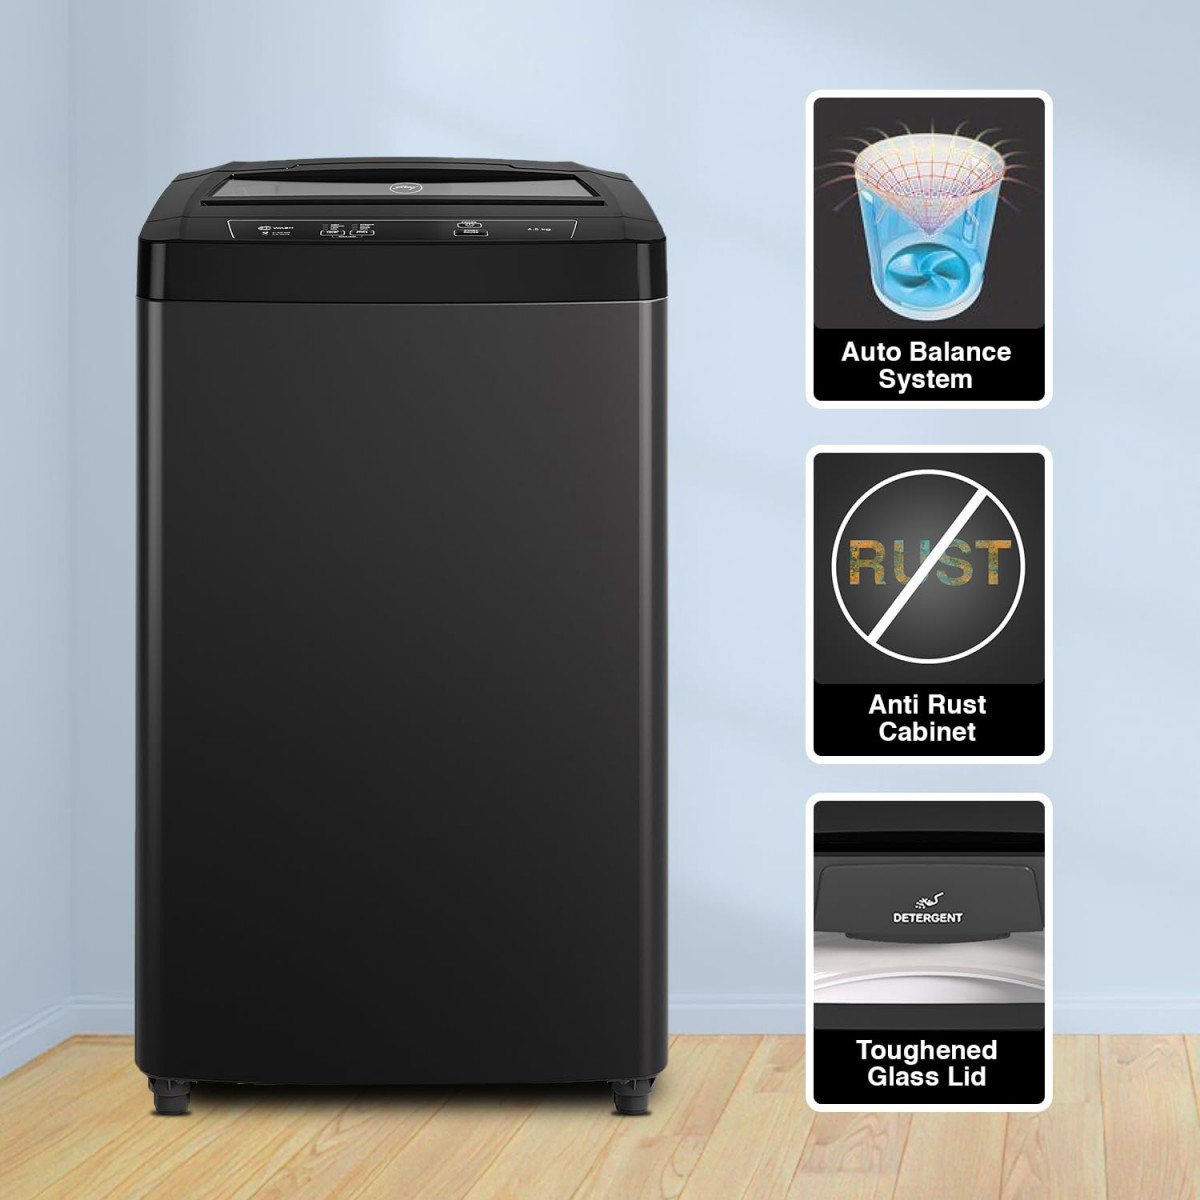 Godrej 65 Kg 5 Star I-Wash Technology for Automatic One Touch Wash Fully-Automatic Top Load Washing Machine